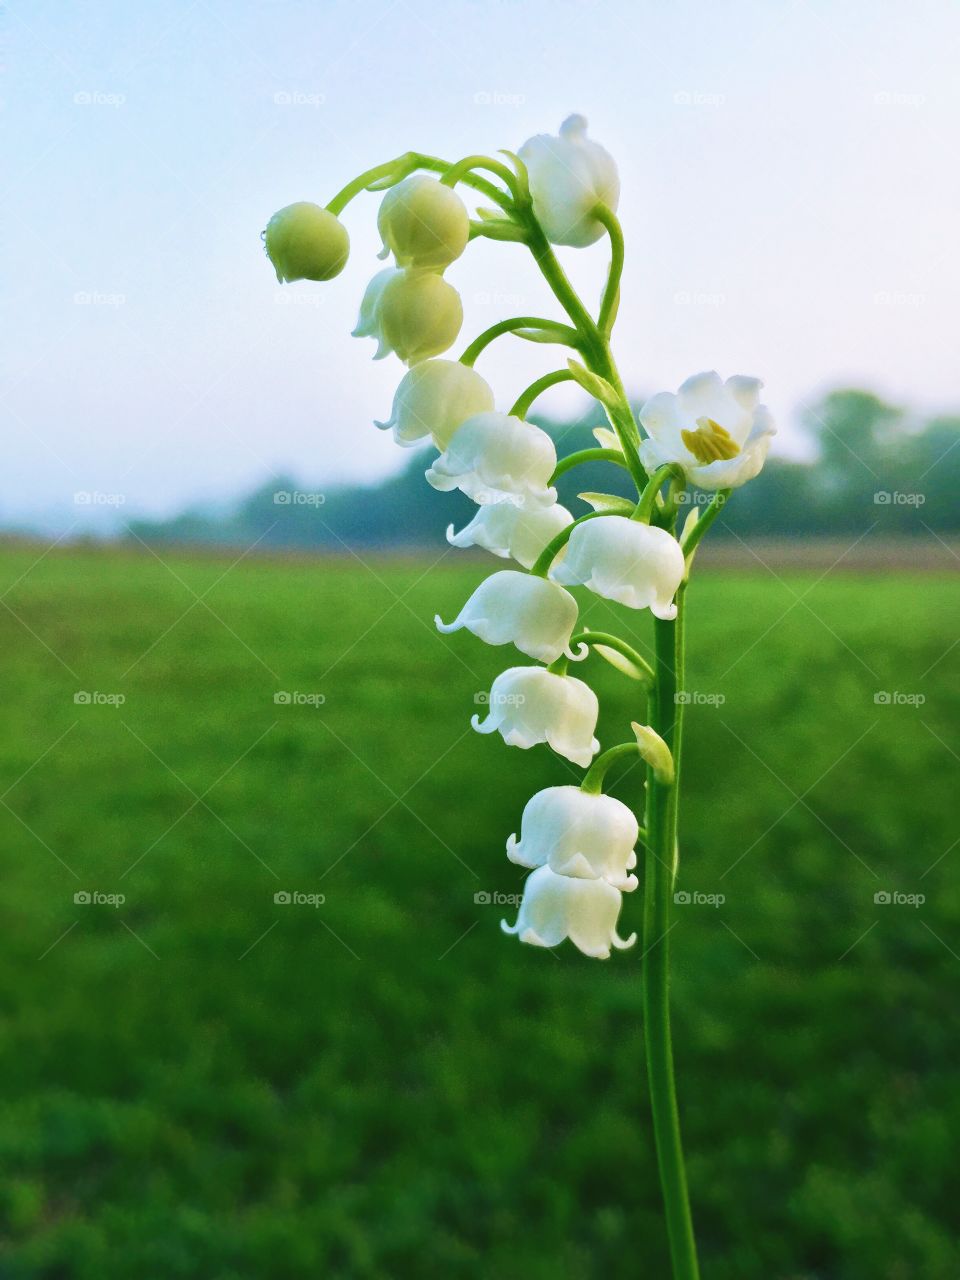 A sprig of lily of the valley against a pale blue sky, blurred grassy pasture and trees